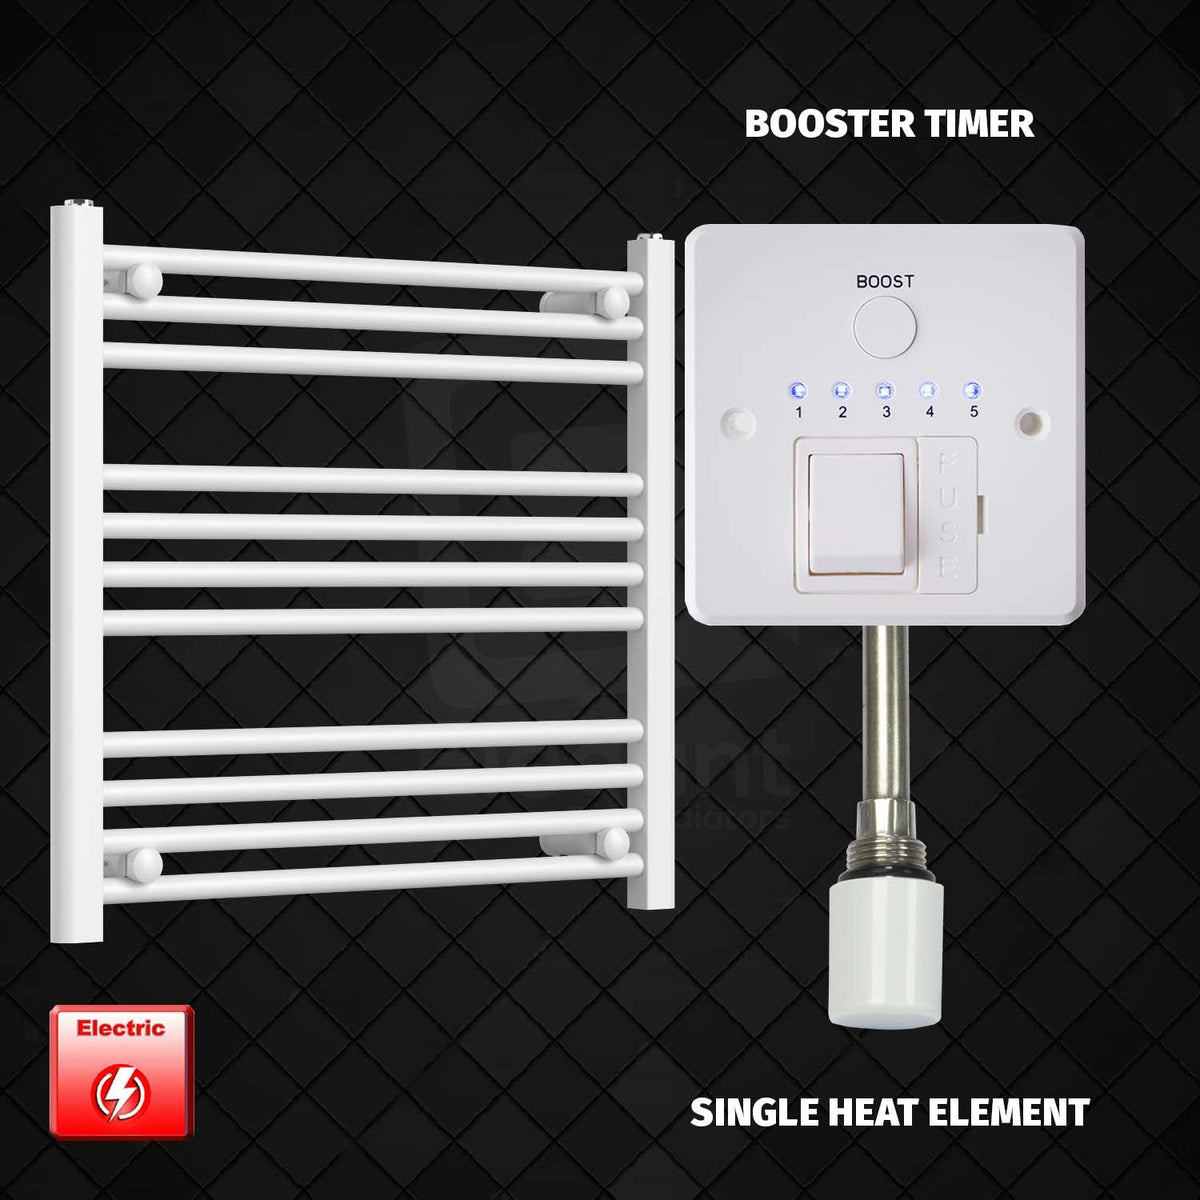 600 mm High 650 mm Wide Pre-Filled Electric Heated Towel Rail Radiator White HTR